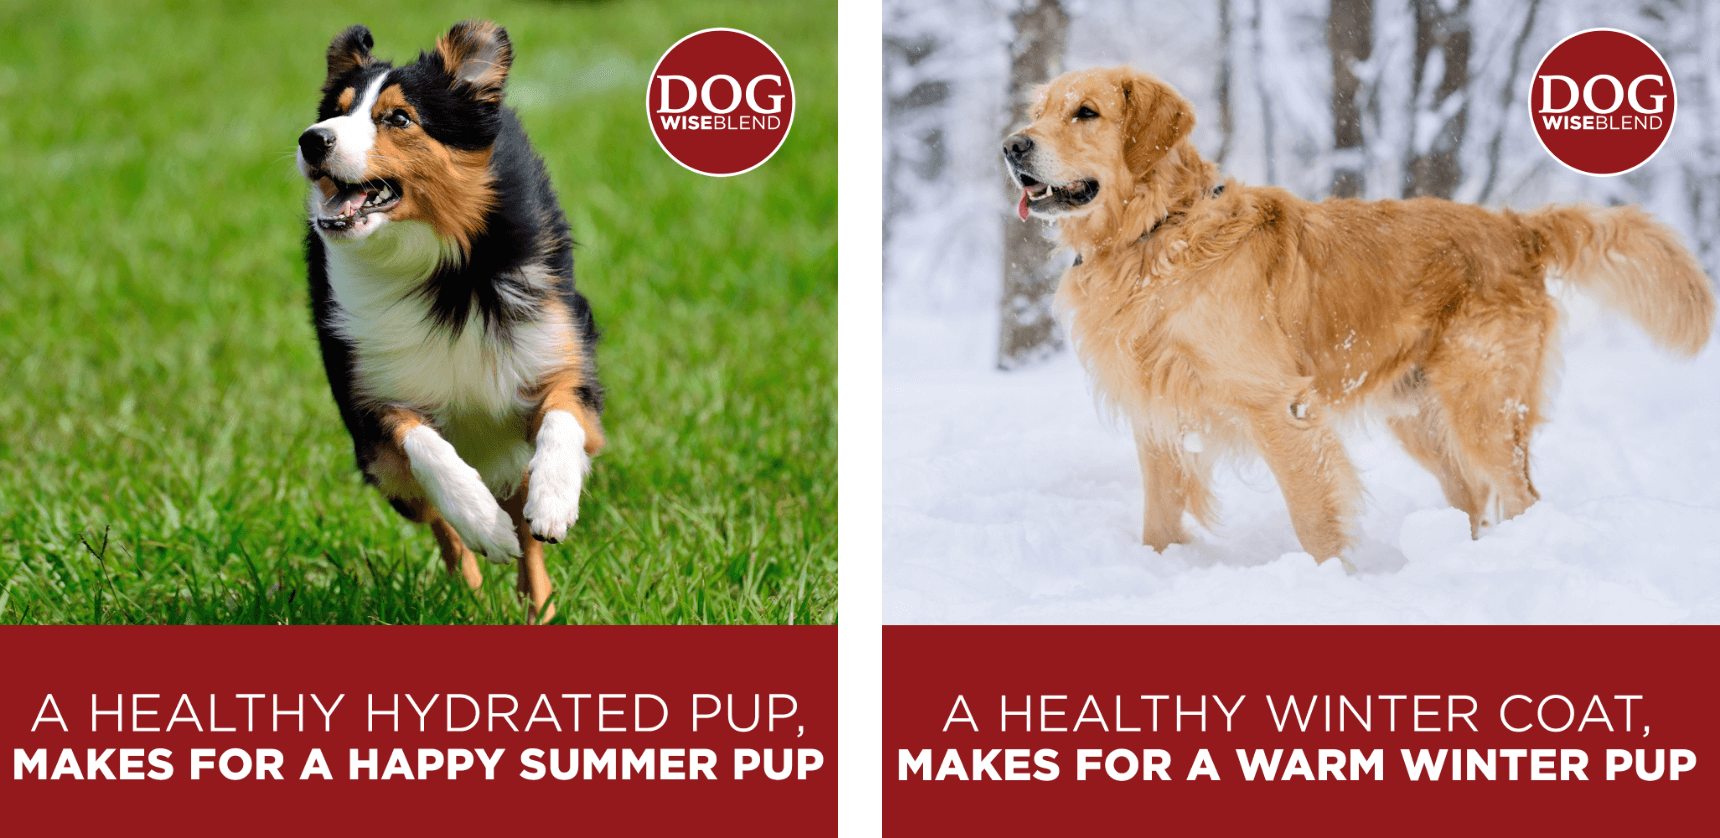 product display content showcasing dogs playing in summer and winter for seasonal content